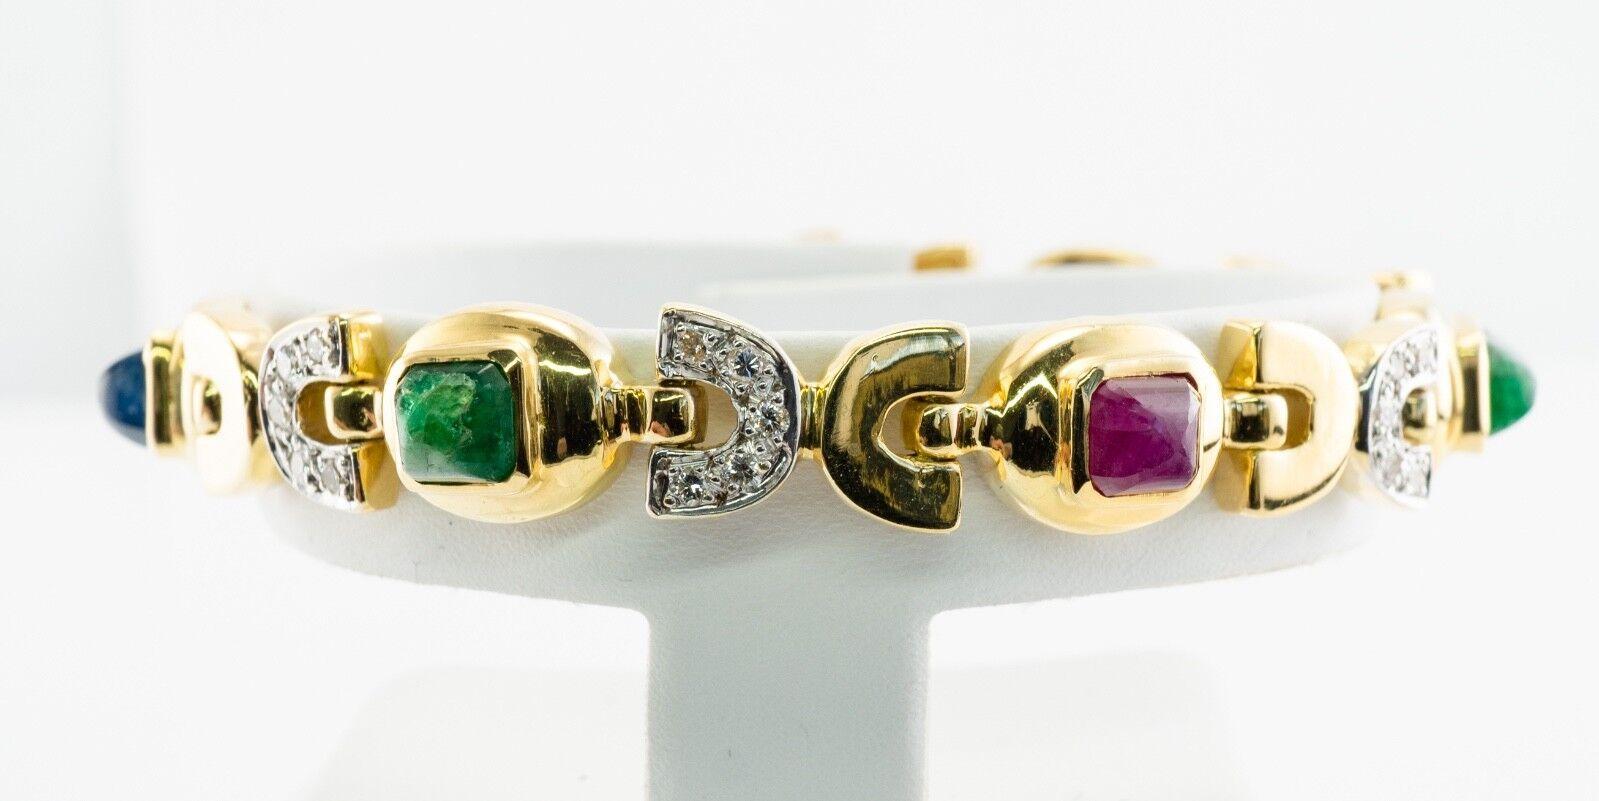 Cassis Emerald Ruby Sapphire Diamond Bracelet 18K Gold

This gorgeous bracelet is finely crafted in solid 18K Yellow gold and also hallmarked 